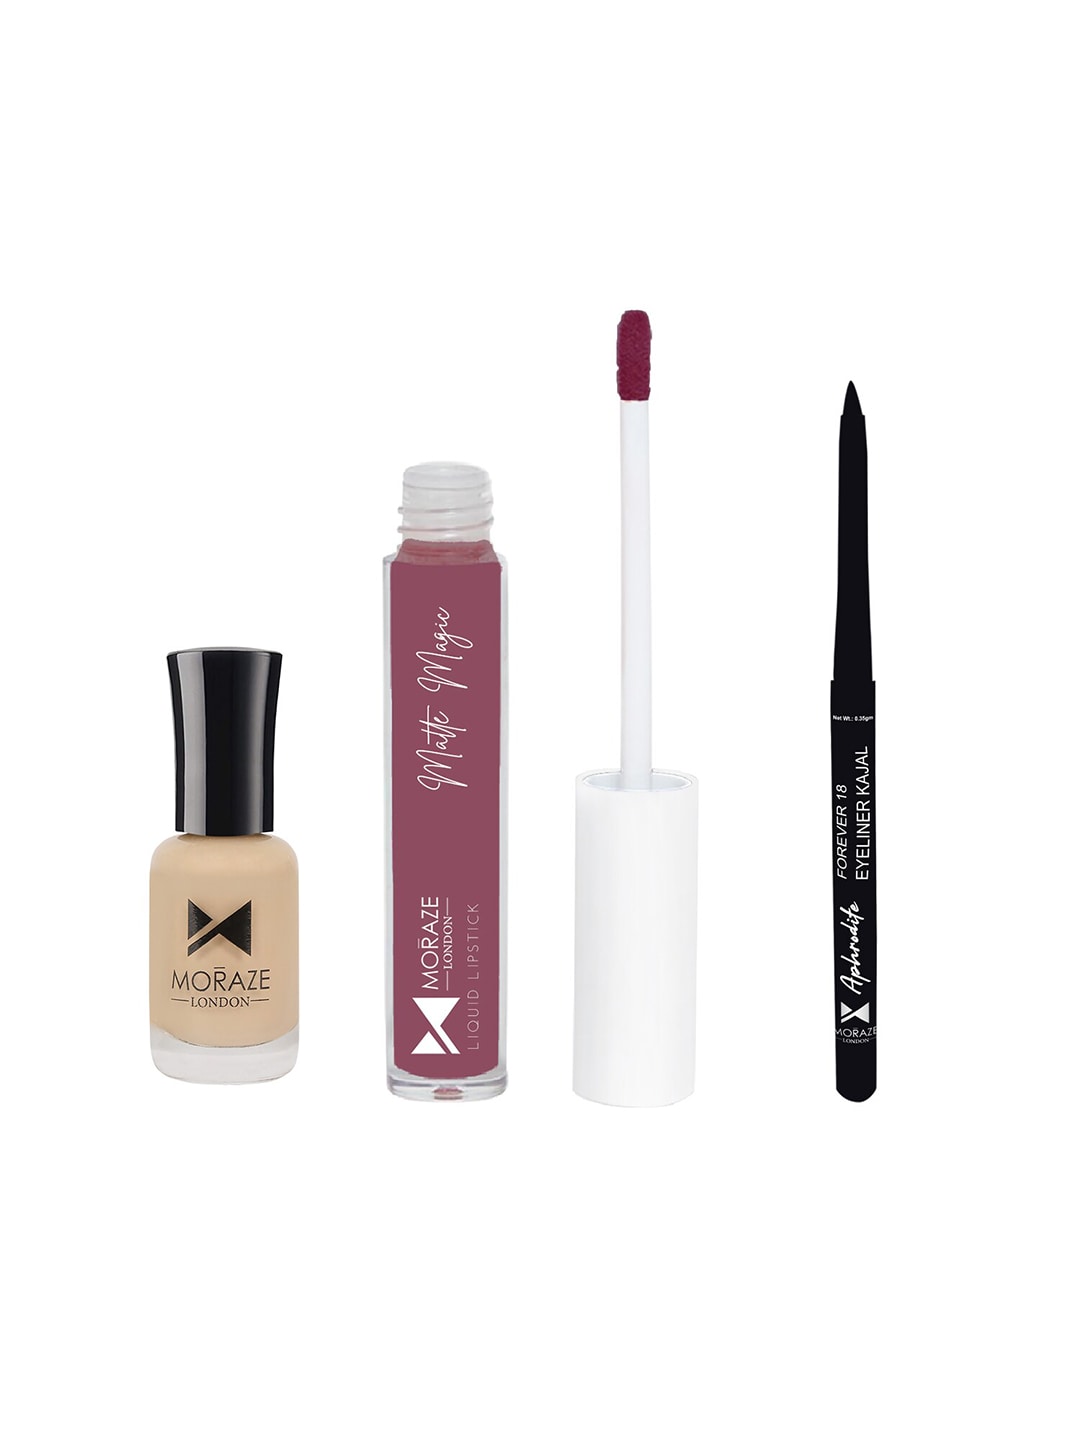 Moraze Nude Nail Polish (Ivory) With 1 Lipstick (Pinky Promise) and 1 Kajal Combo Pack Price in India